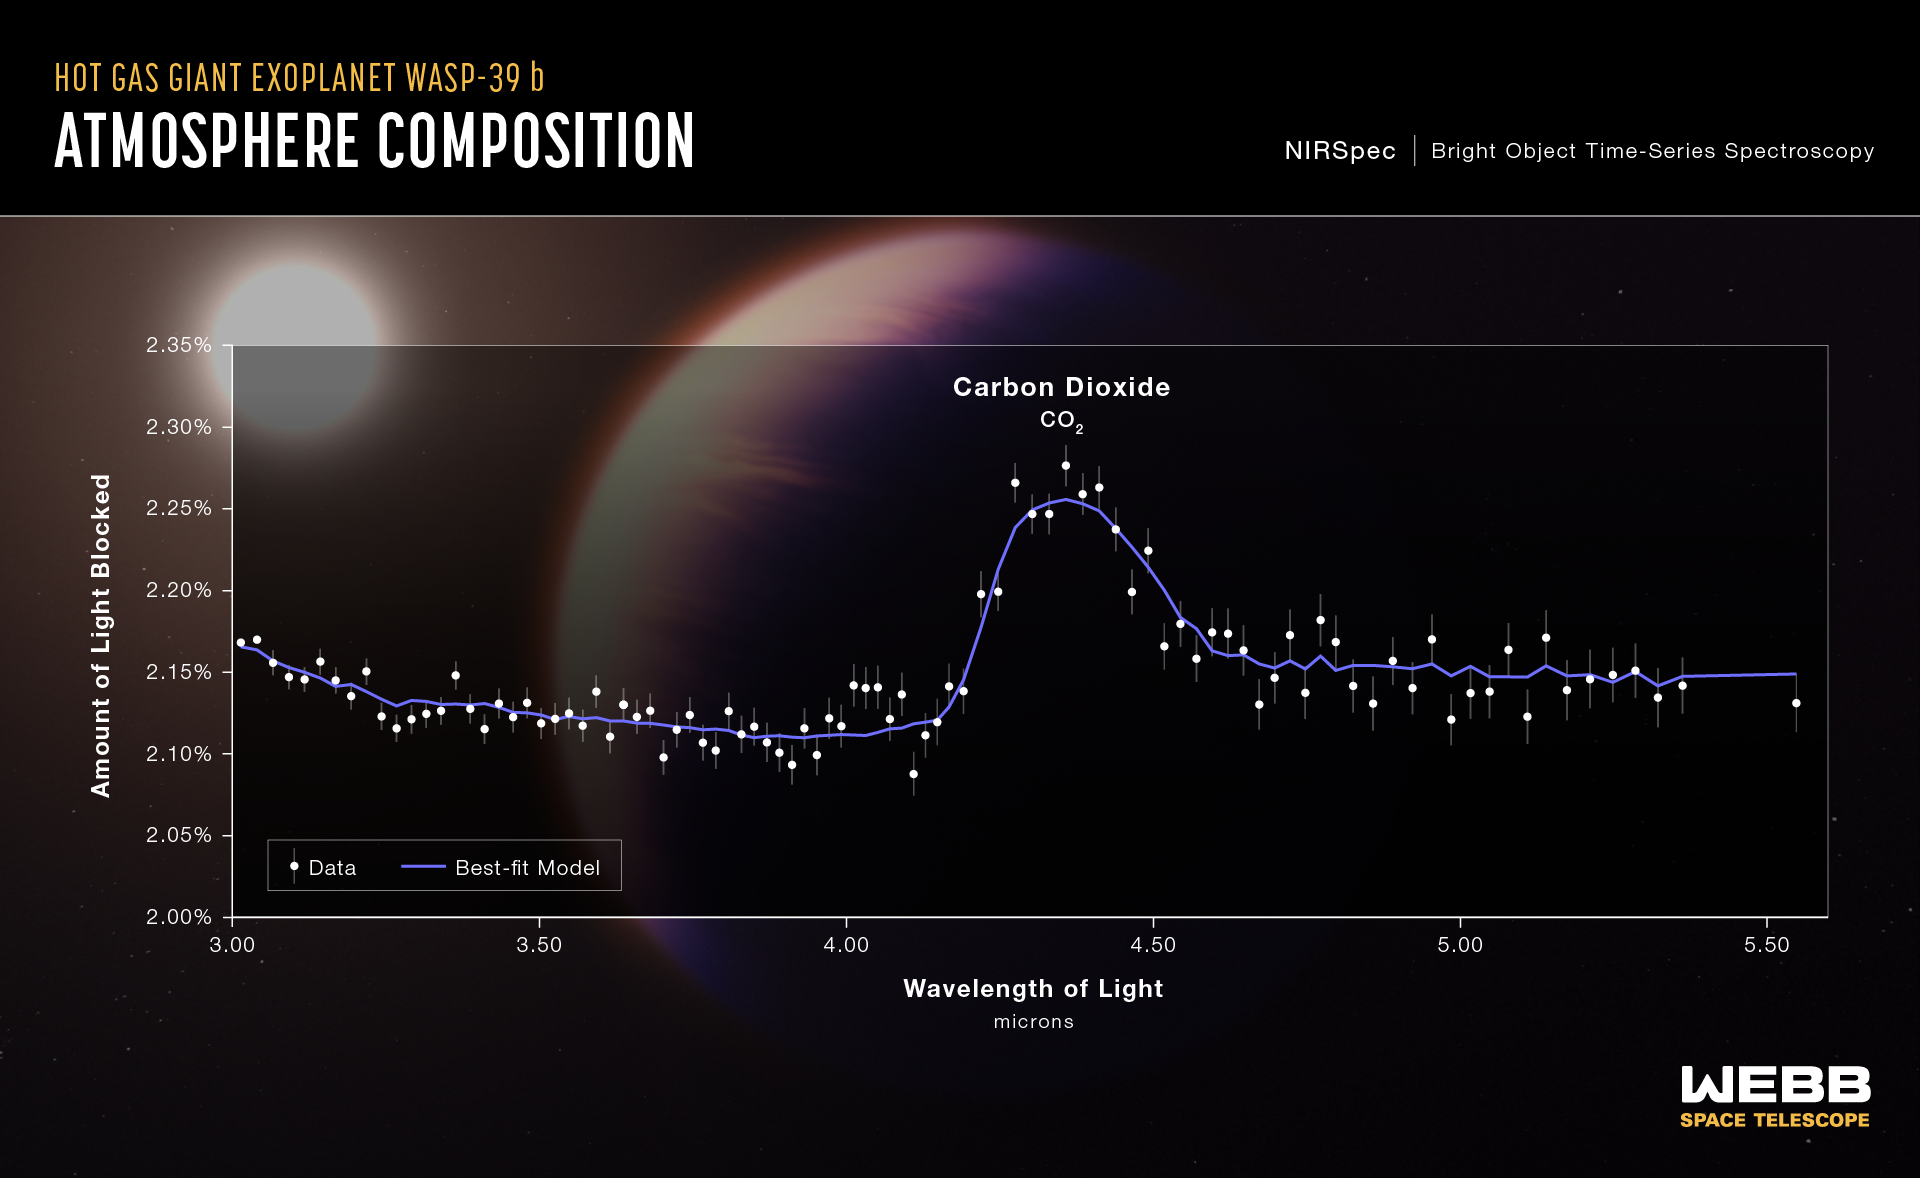 A transmission spectrum of the hot gas giant exoplanet WASP-39 b captured by JWST’s Near-Infrared Spectrograph (NIRSpec) on July 10, 2022, reveals the first clear evidence for carbon dioxide in a planet outside the solar system. This is also the first detailed exoplanet transmission spectrum ever captured that covers wavelengths between 3 and 5.5 microns. A transmission spectrum is made by comparing starlight filtered through a planet’s atmosphere as it moves in front of the star, to the unfiltered starlight detected when the planet is beside the star. Each of the 95 data points (white circles) on this graph represents the amount of a specific wavelength of light that is blocked by the planet and absorbed by its atmosphere. Wavelengths that are preferentially absorbed by the atmosphere appear as peaks in the transmission spectrum. The peak centered around 4.3 microns represents the light absorbed by carbon dioxide. The gray lines extending above and below each data point are error bars that show the uncertainty of each measurement, or the reasonable range of actual possible values. For a single observation, the error on these measurements is extremely small